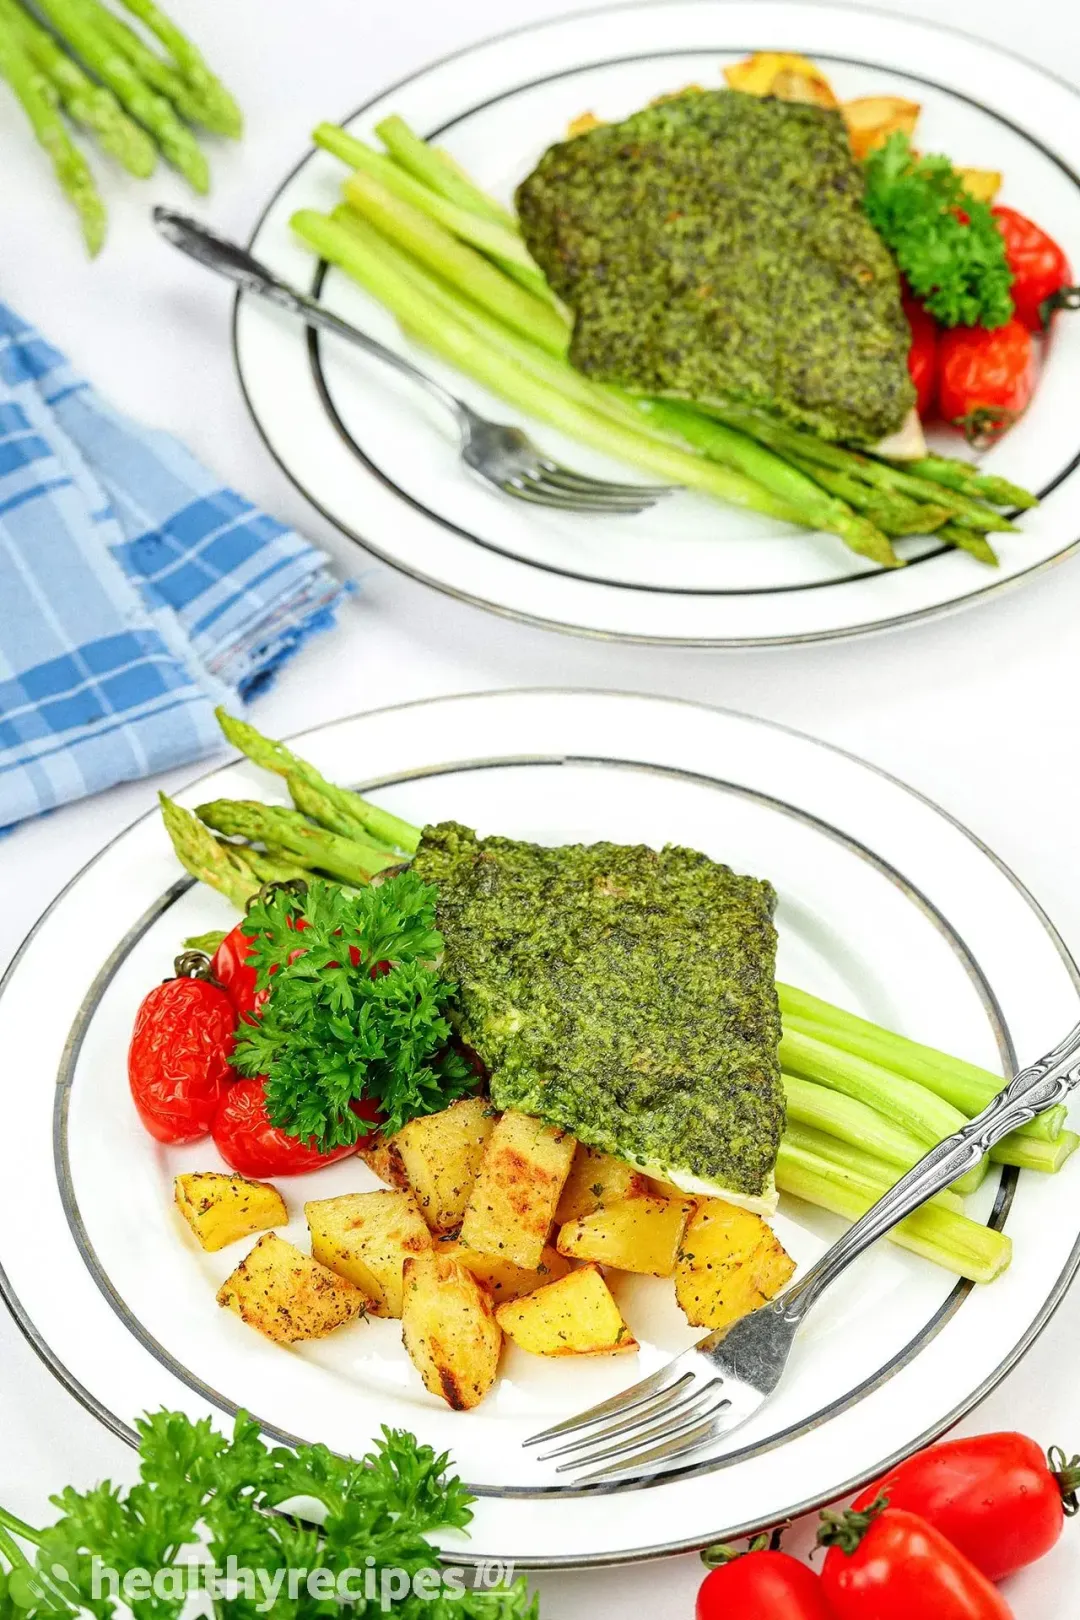 What to Serve with Pesto Sea Bass